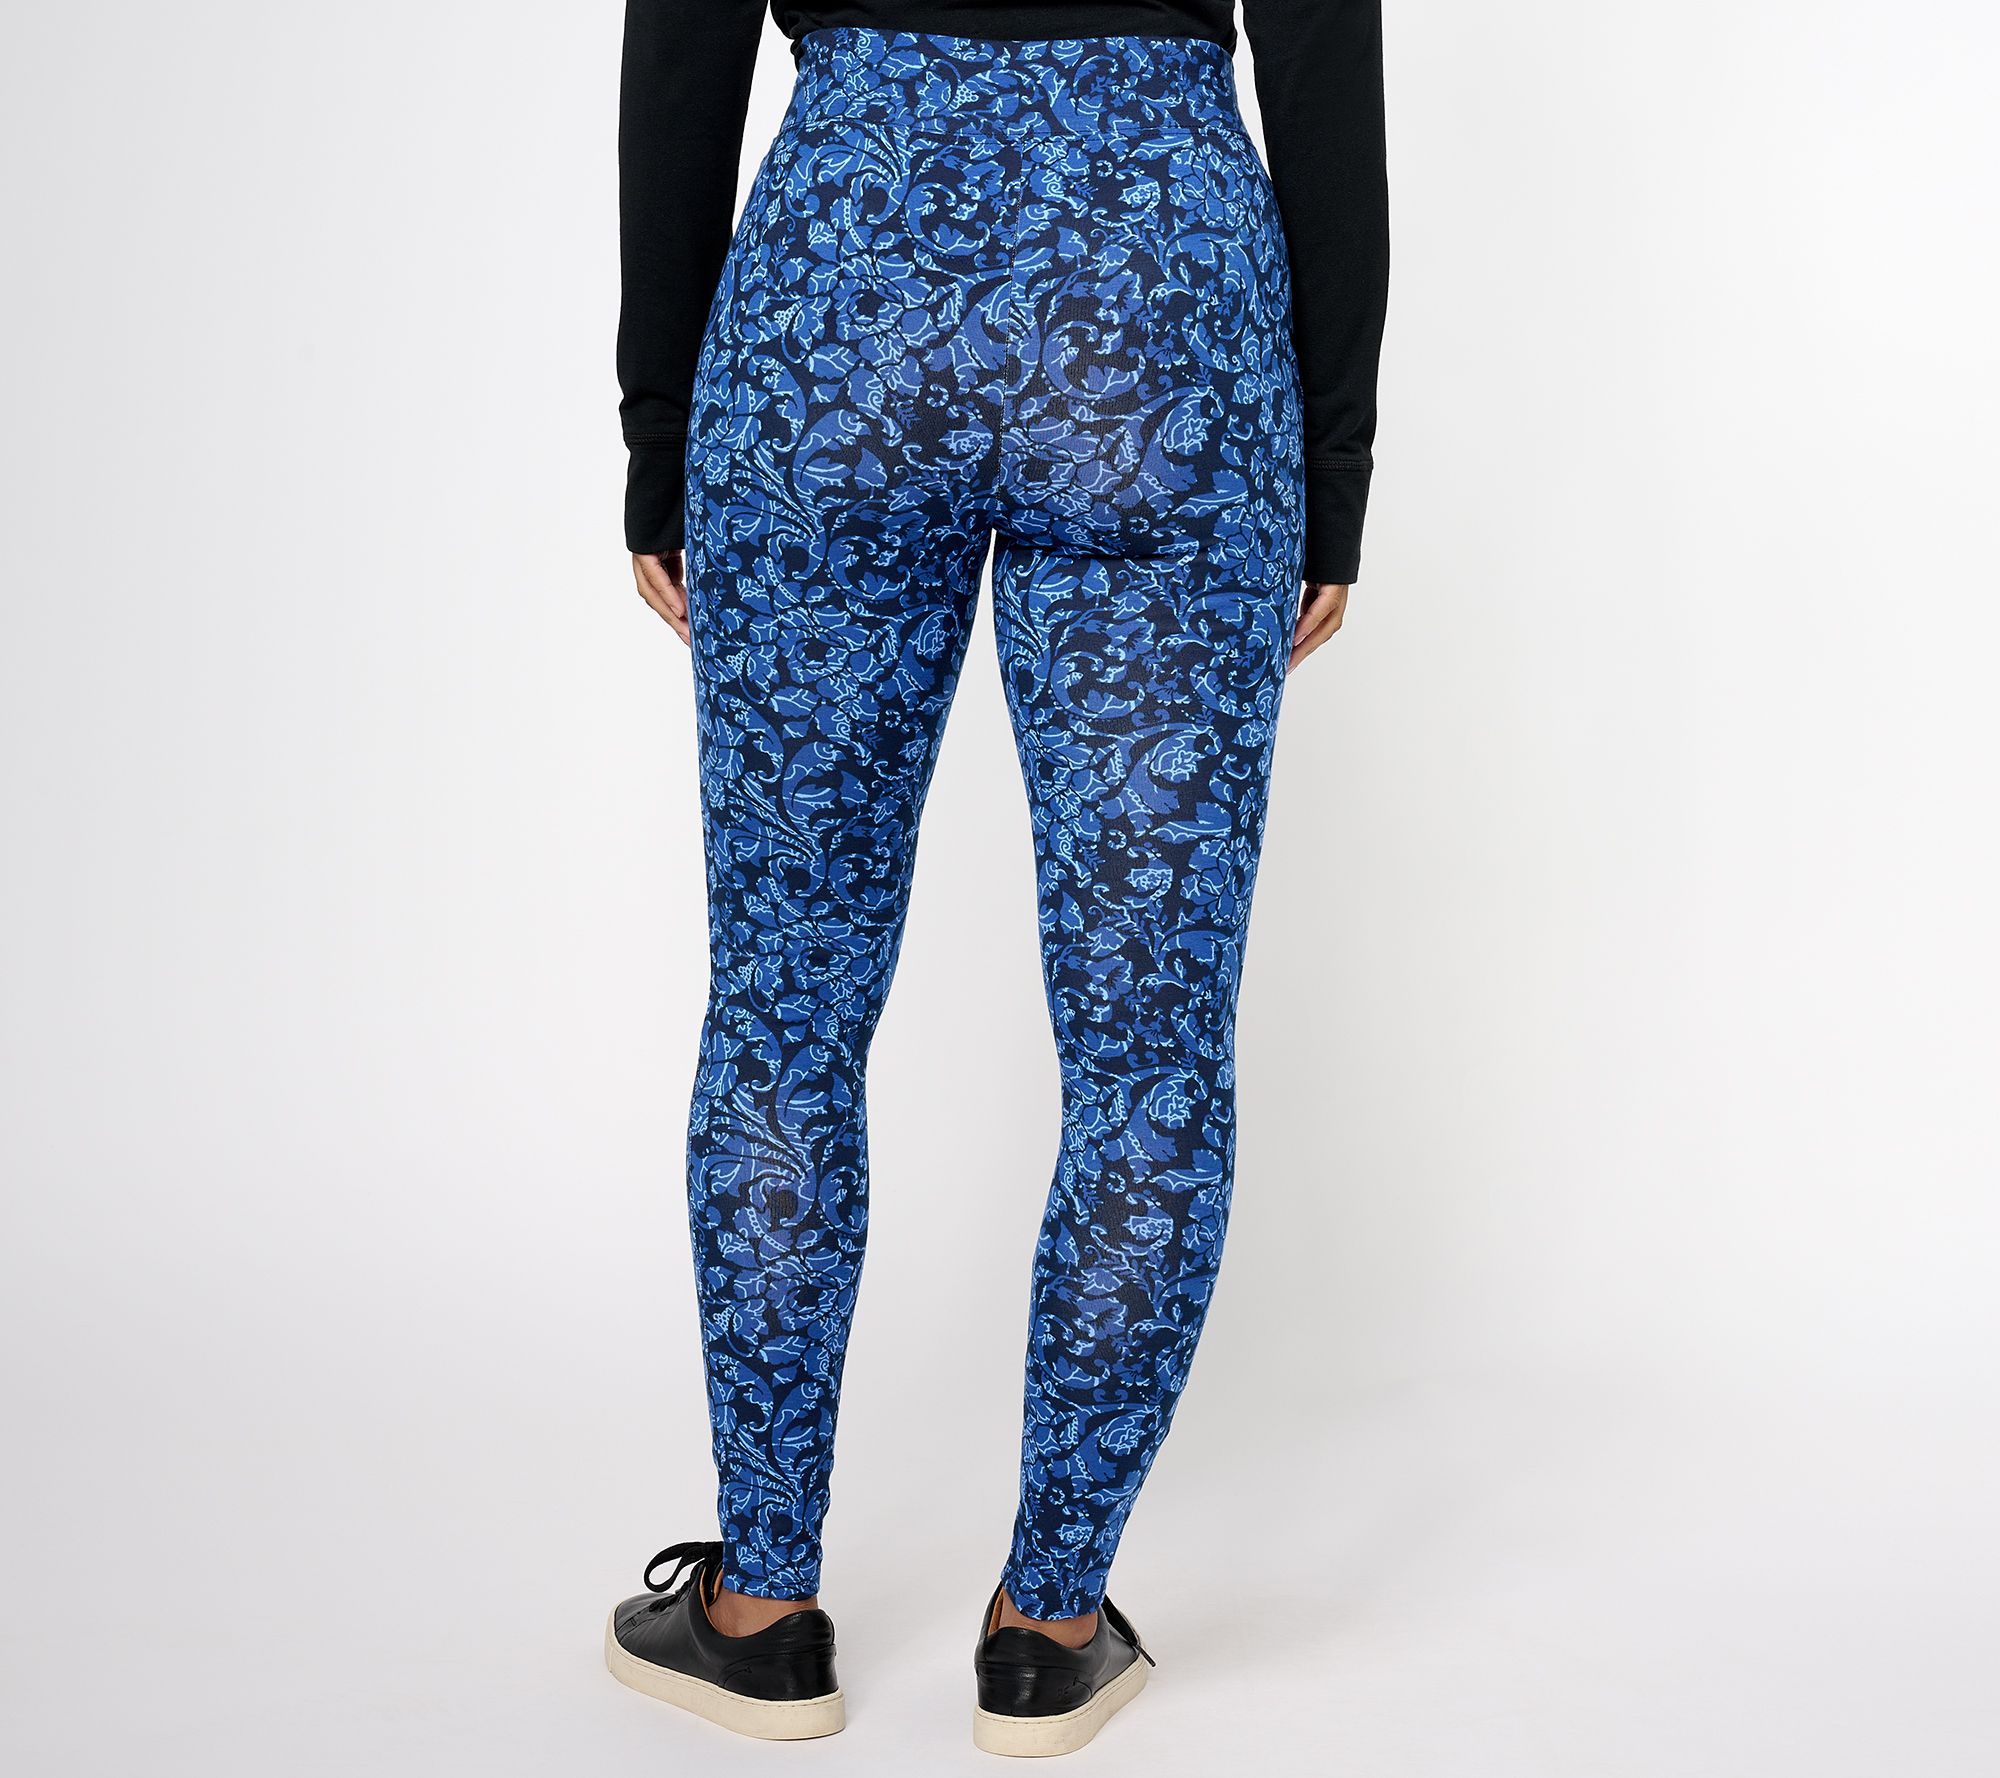 Denim & Co. Active Petite Printed Duo Stretch Legging with Pintuck